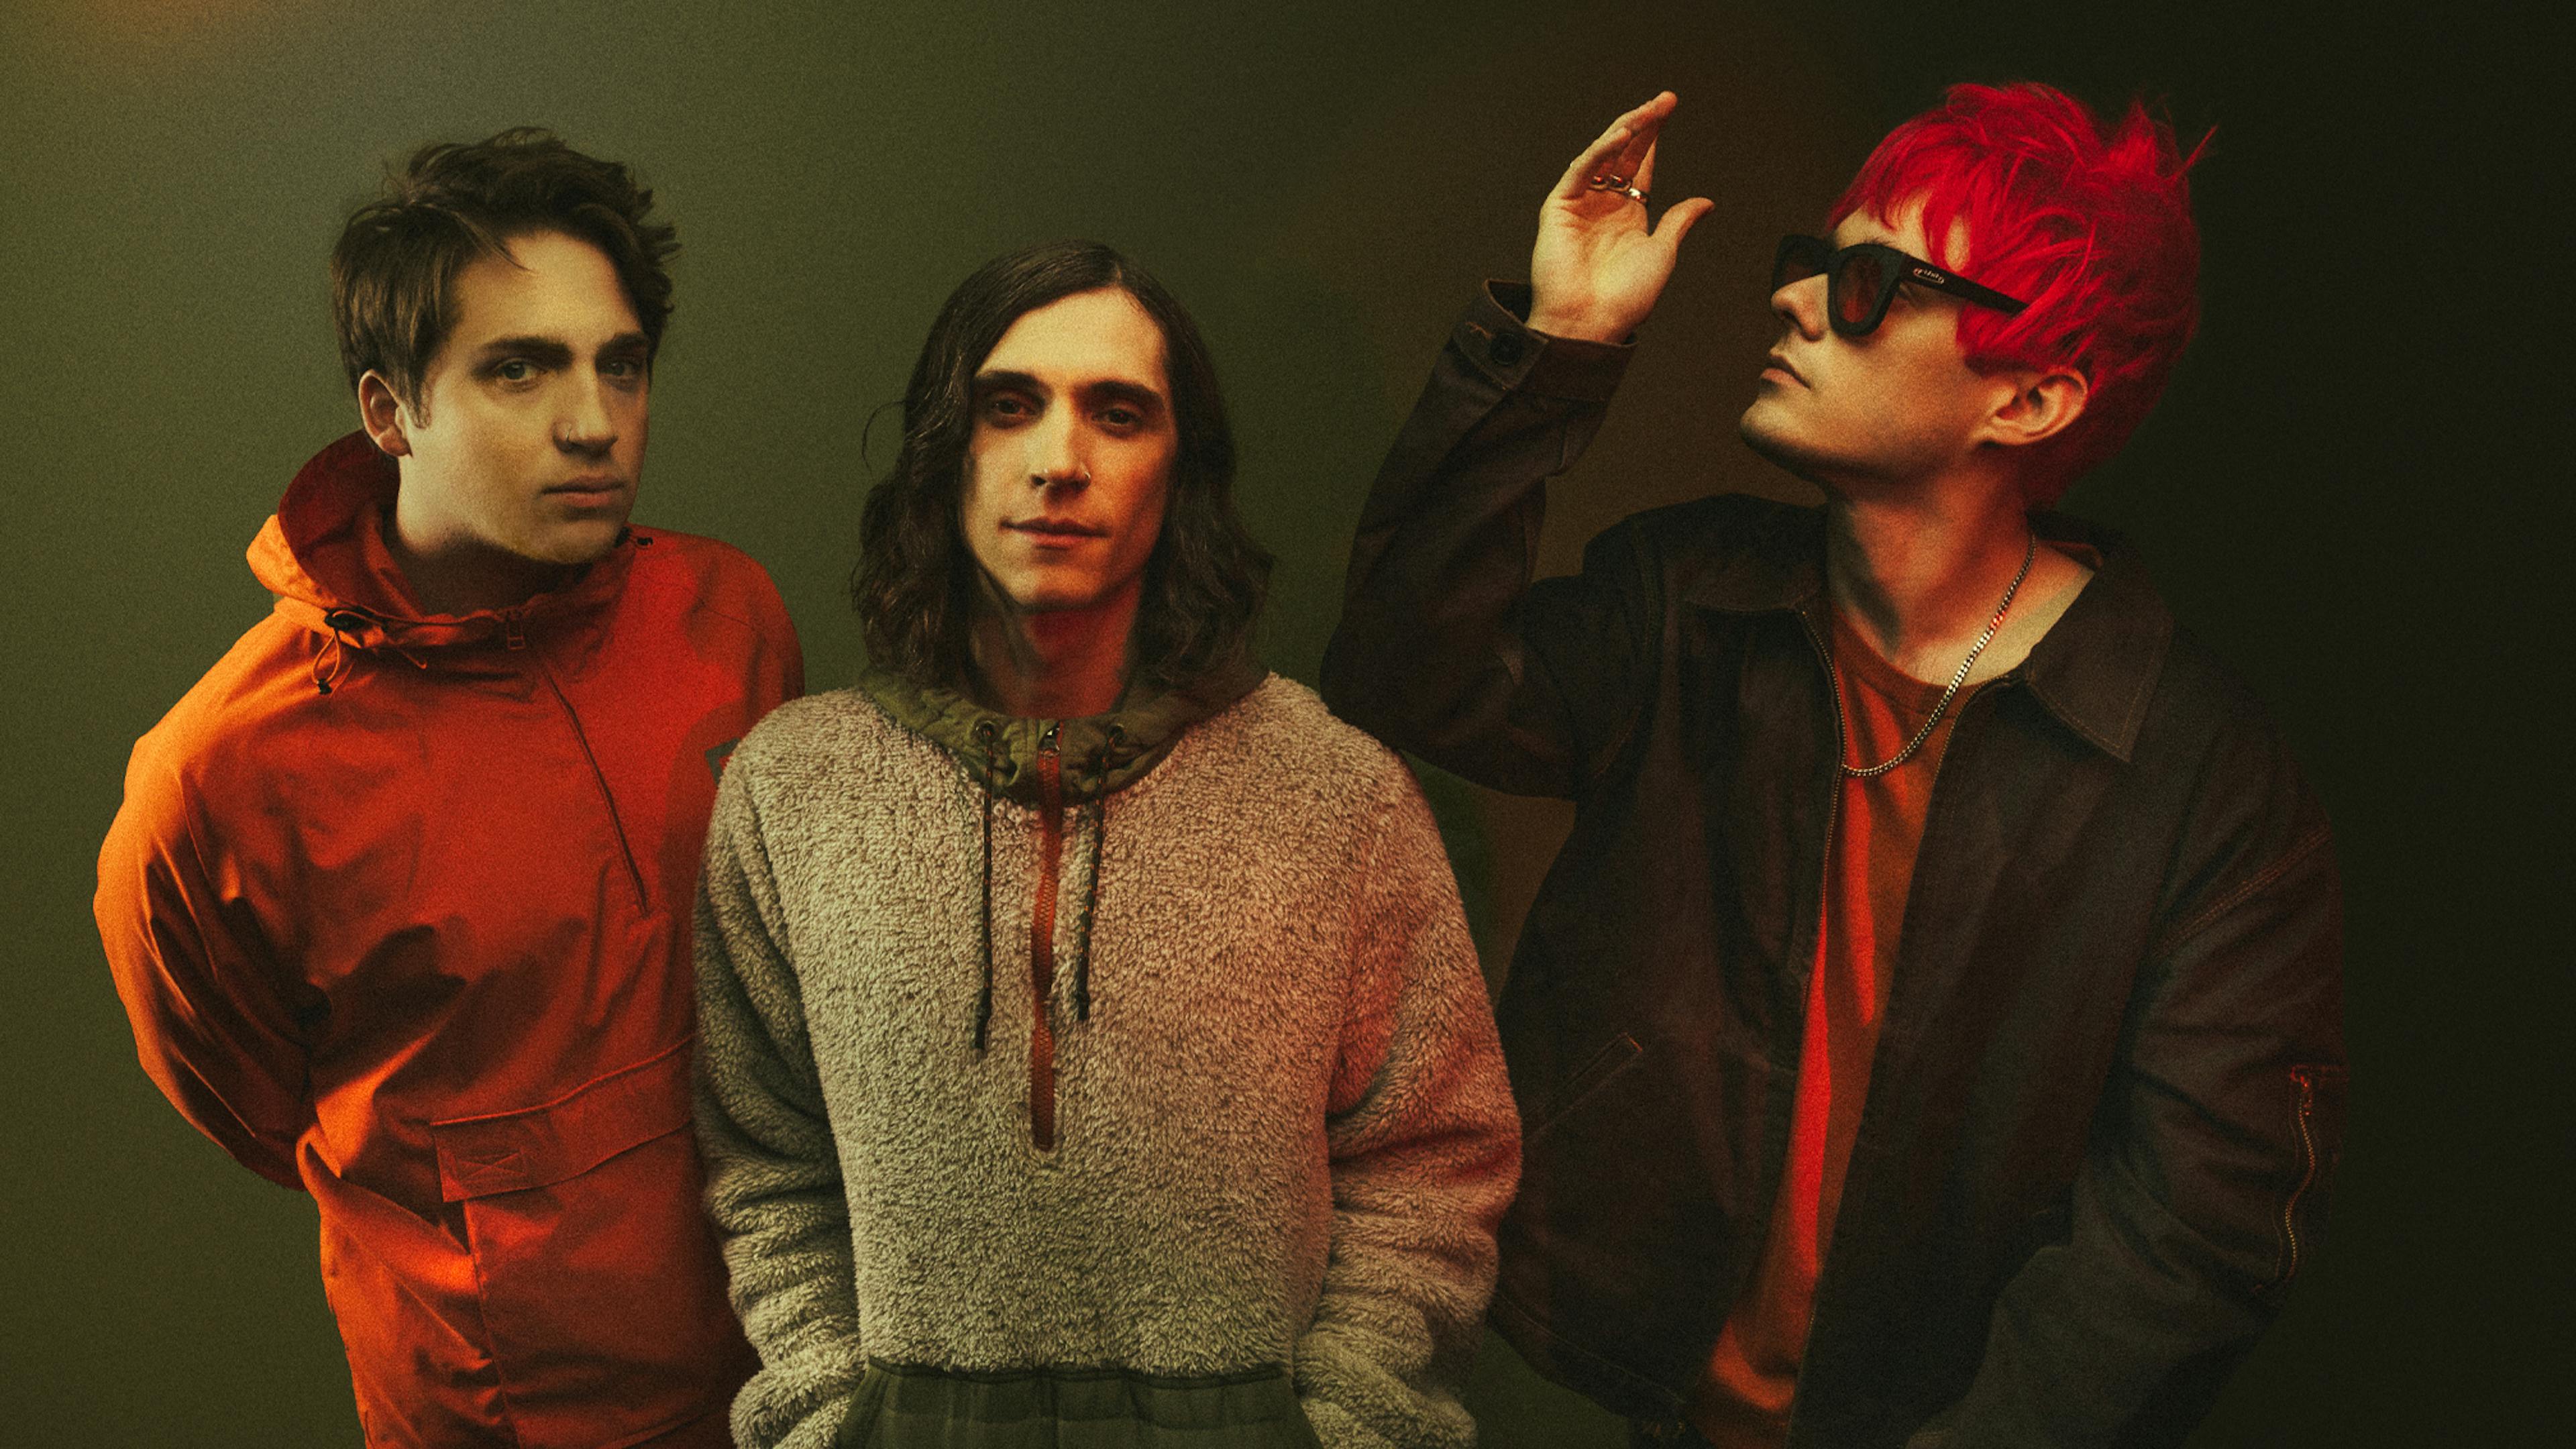 Waterparks’ Awsten Knight: “I hate spoilers, but this is a really good introduction into what’s next”